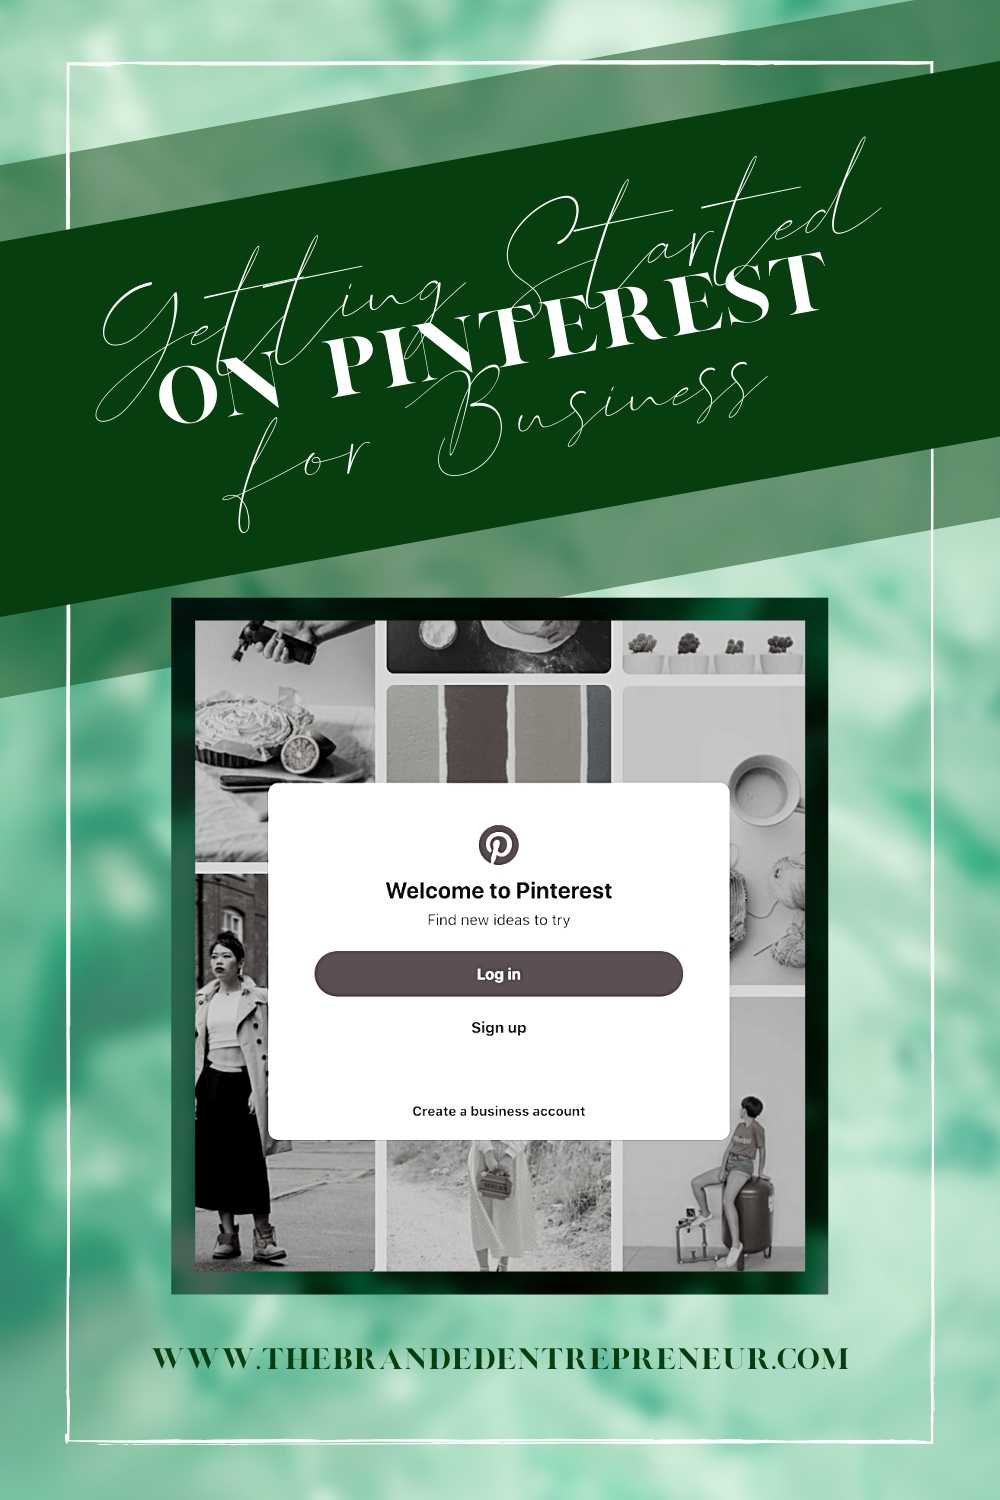 Getting started on Pinterest for Business